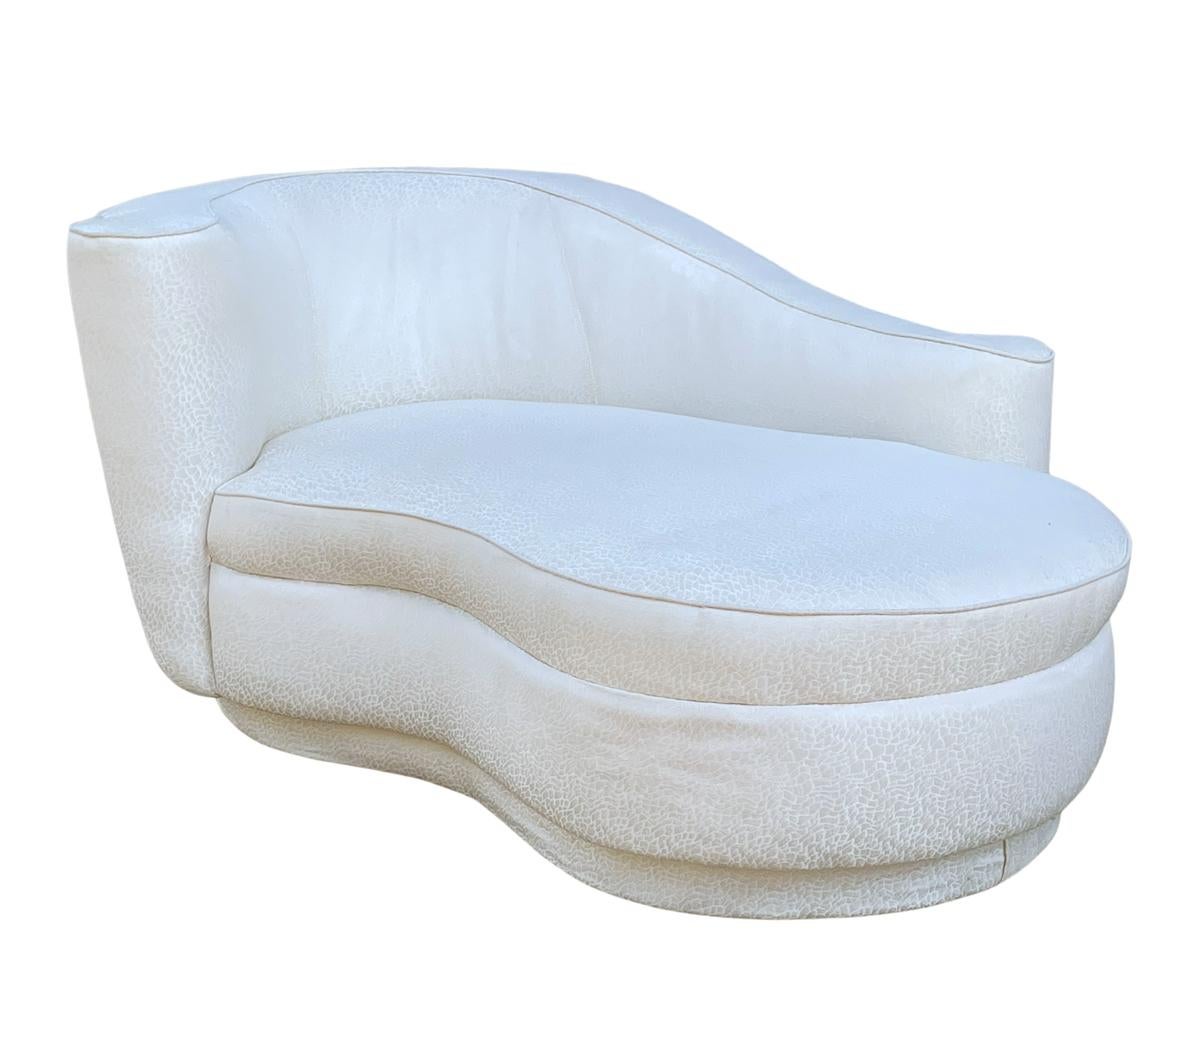 A sculptural chaise lounge in a cloud form circa 1980s. This piece features its original upholstery and it shows some light soiling. Cleaning or recovering is recommended.